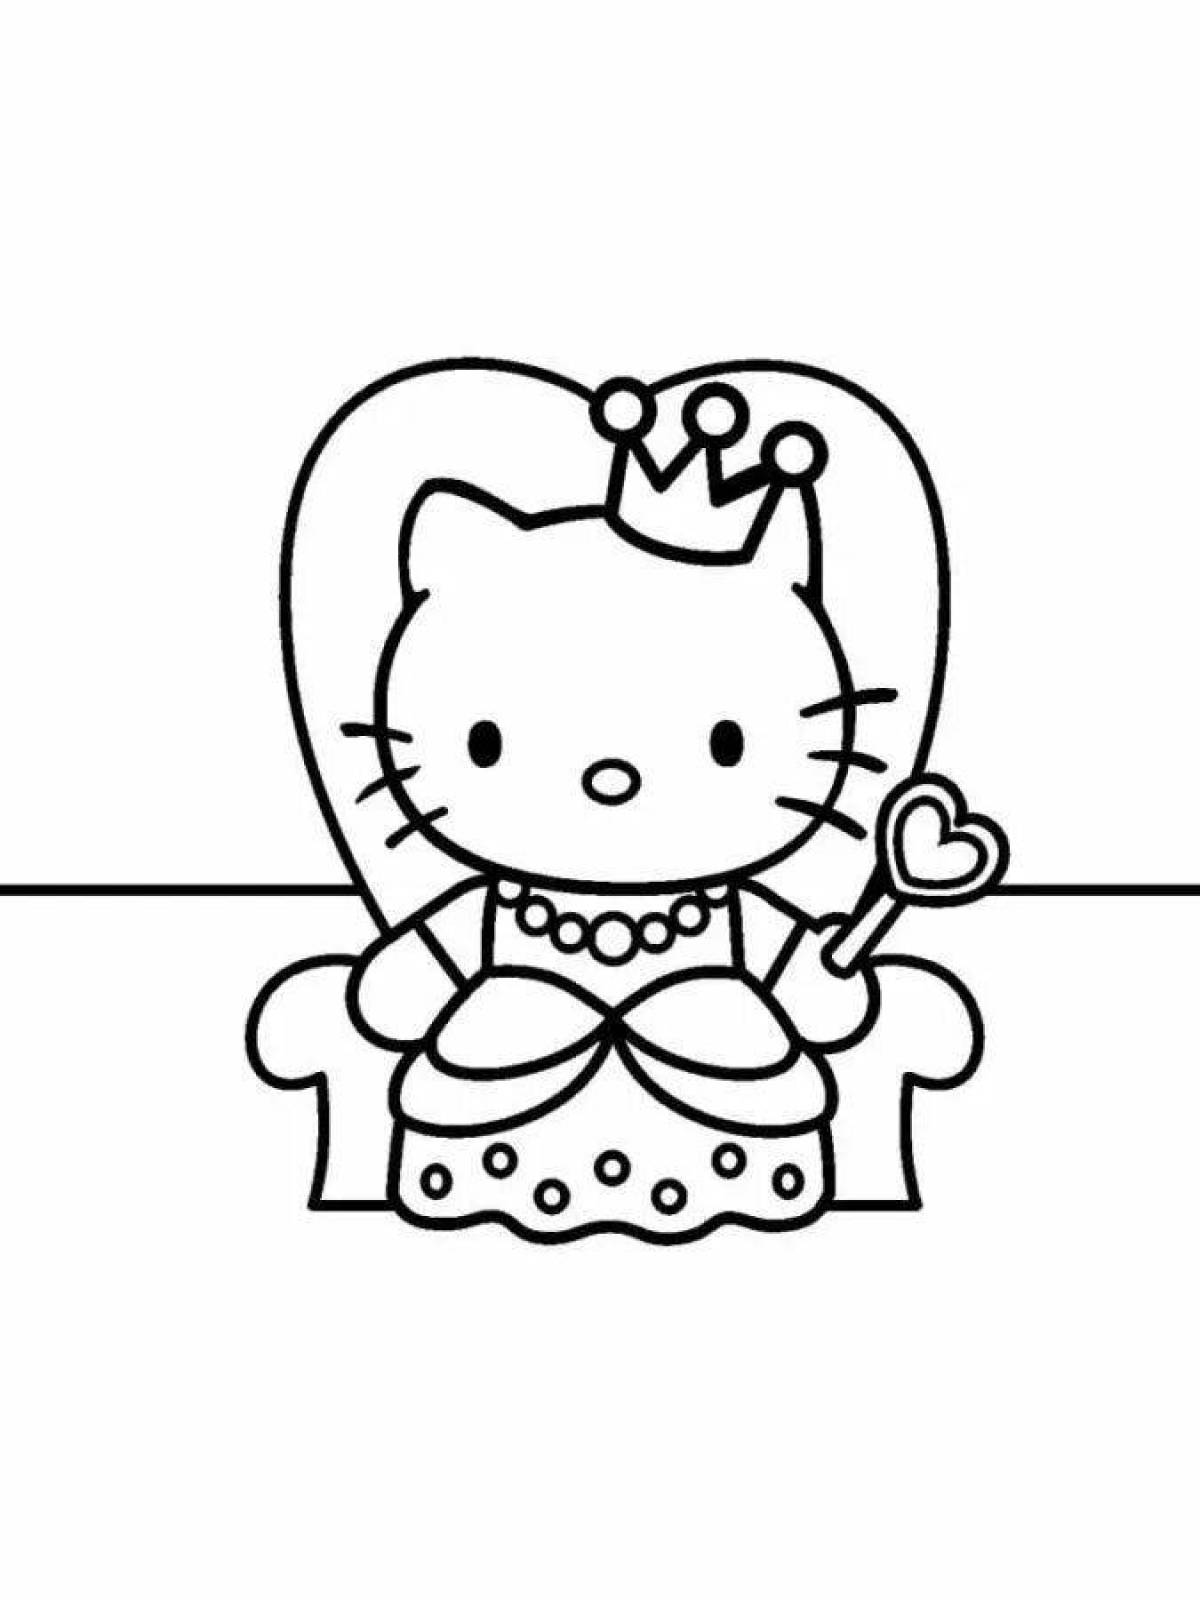 Gorgeous hello kitty face coloring page